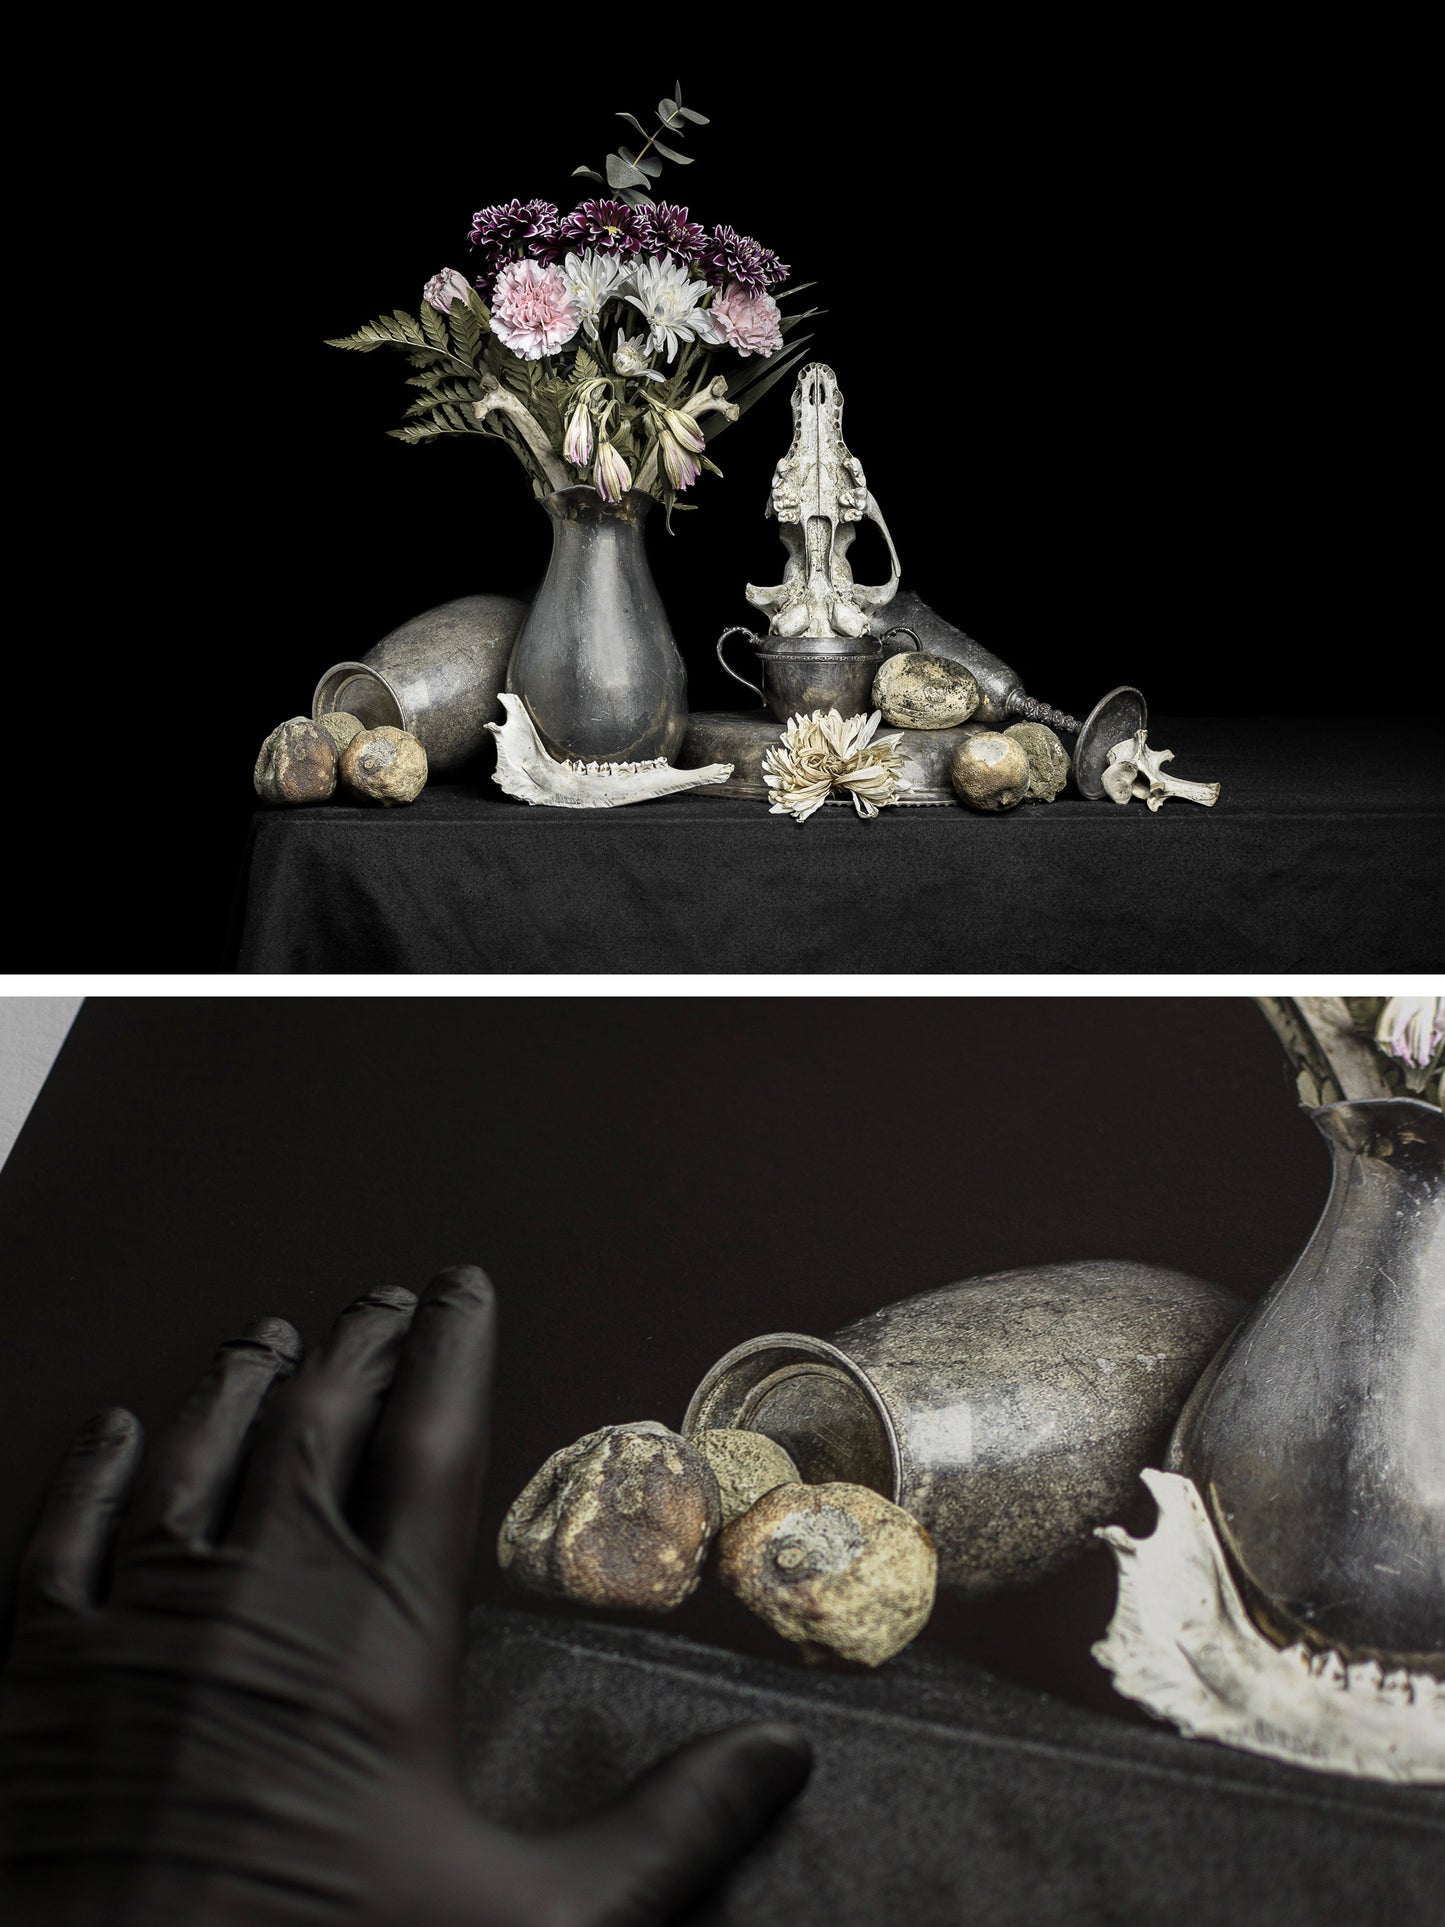 Neal Auch, Vanitas with Flowers and Bones - Signed Print